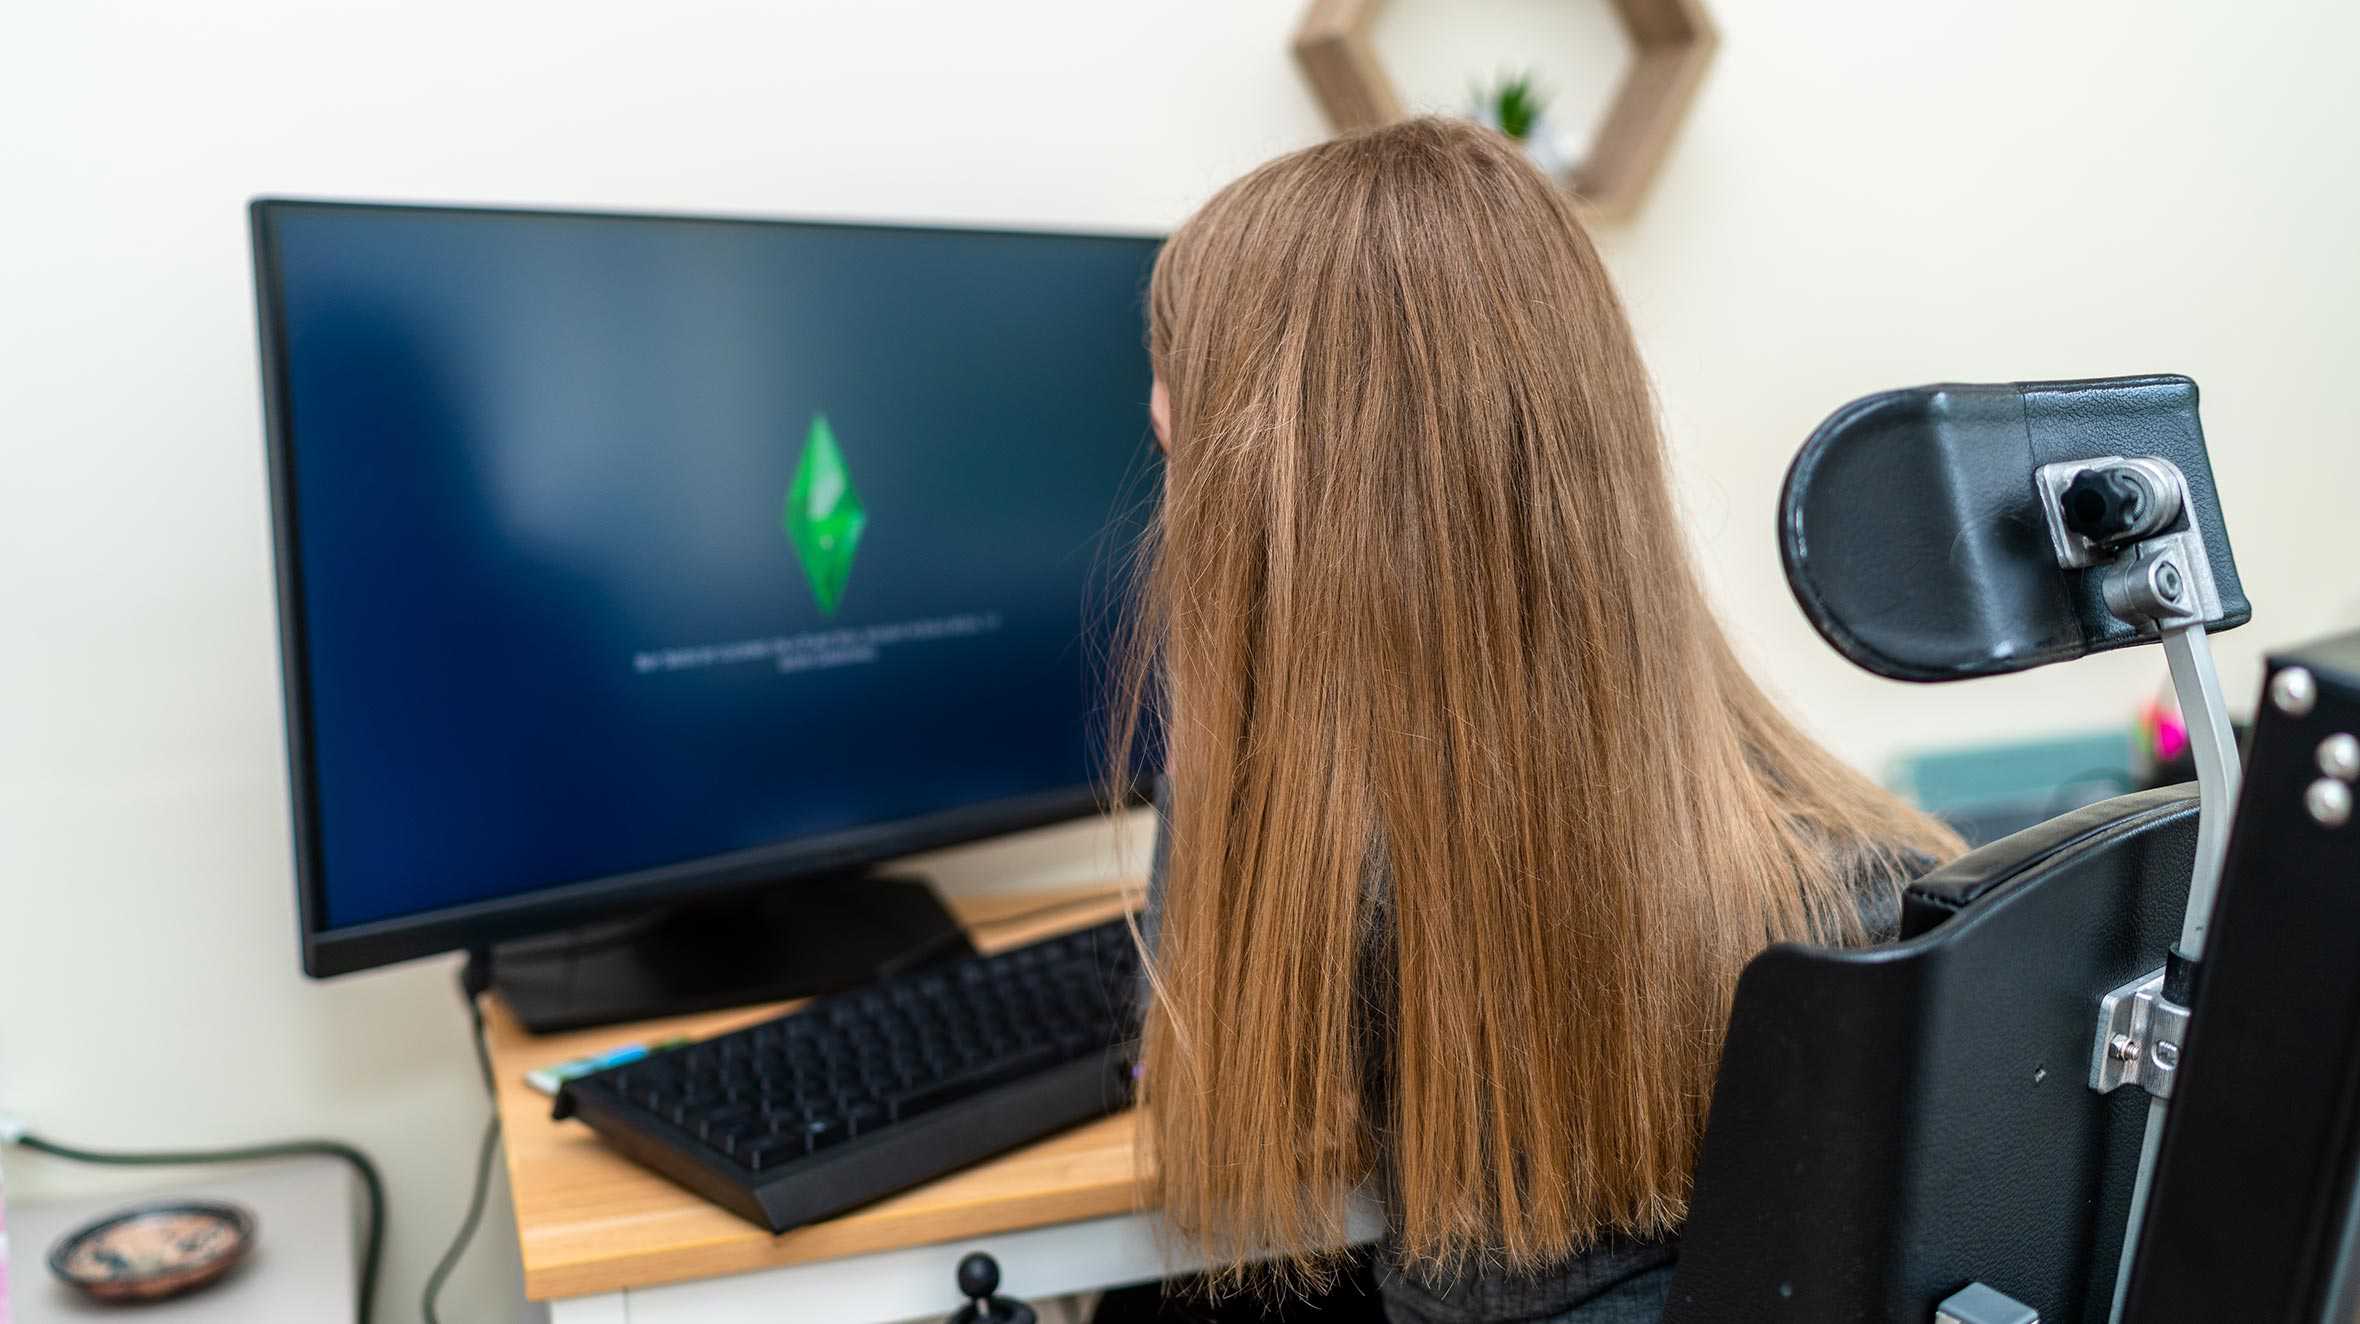 Sophie using her new gaming PC, facing away from the camera.